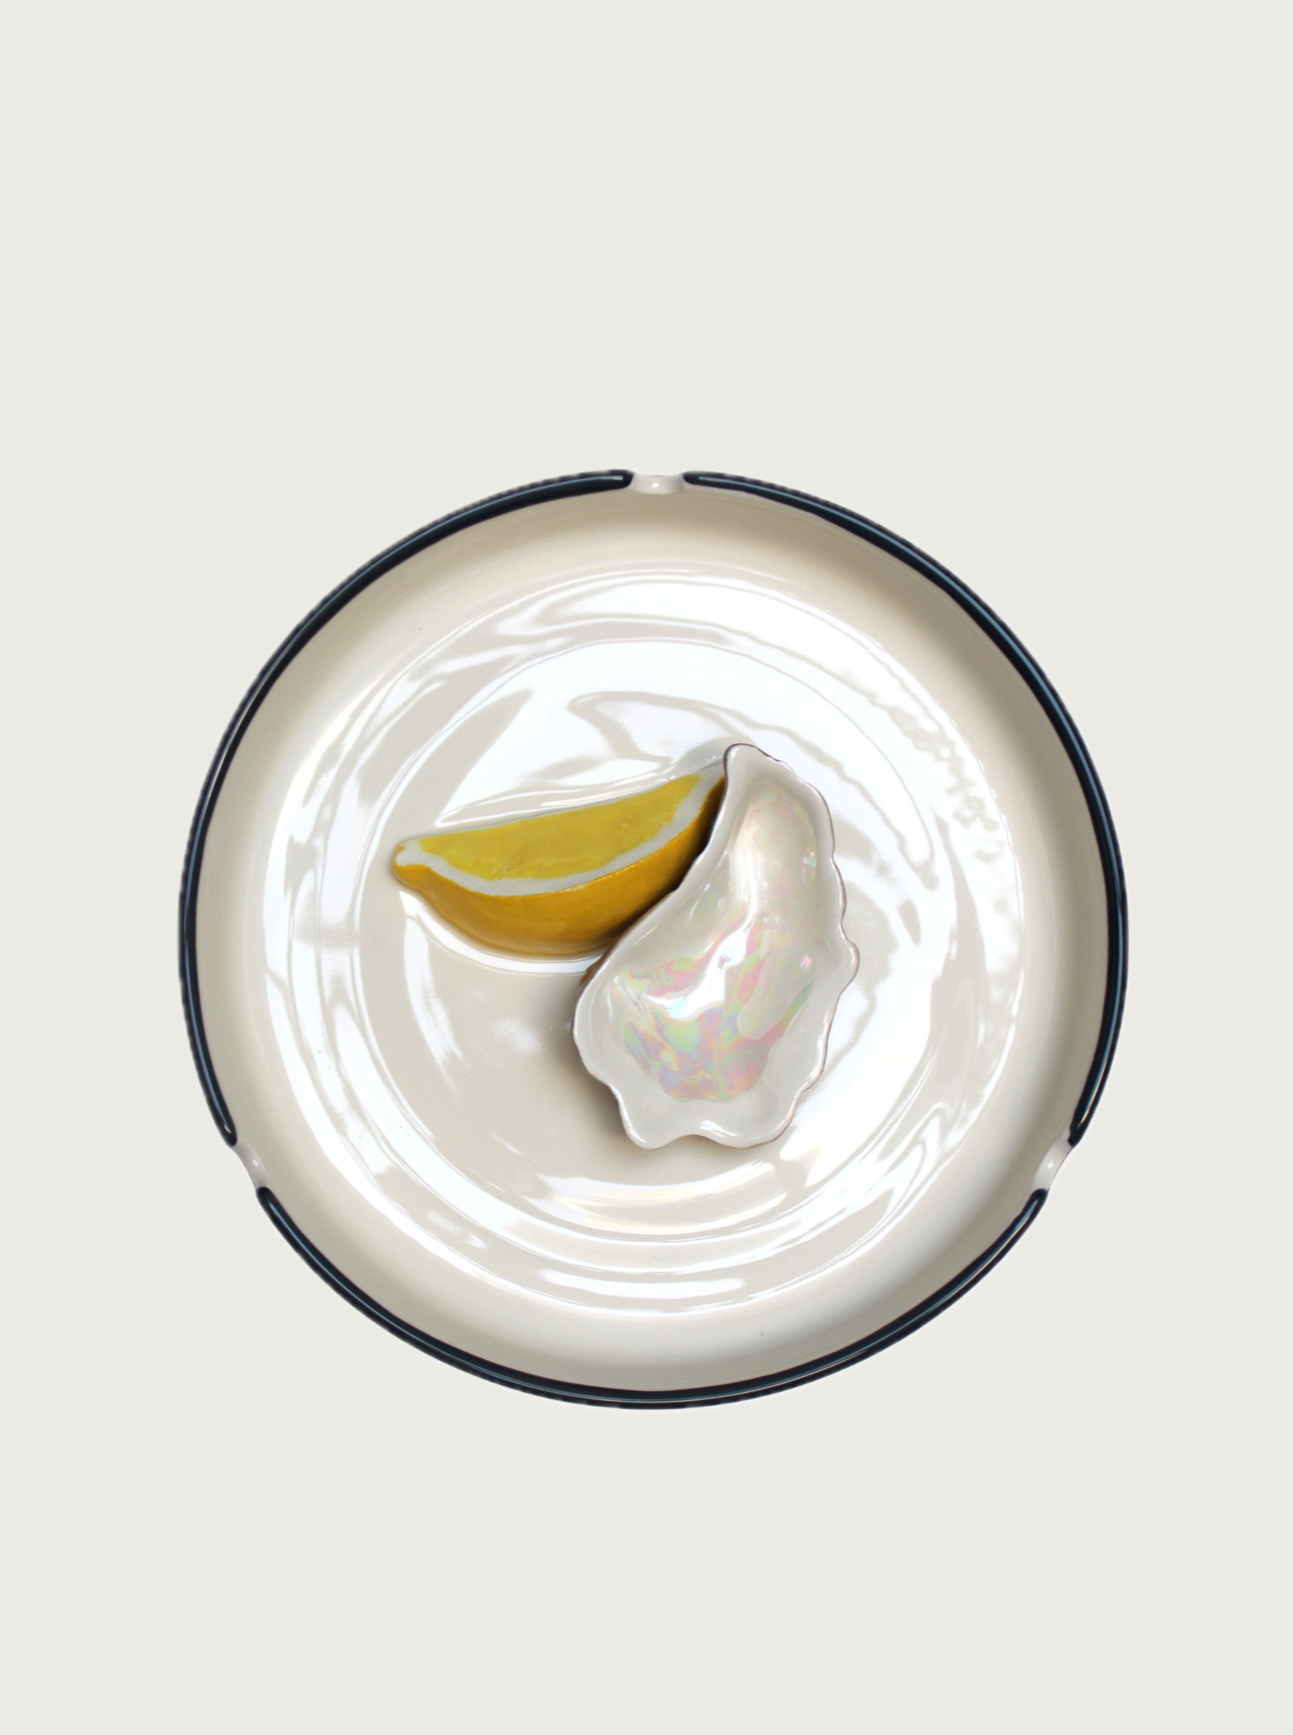 A pristine white plate with a black rim holds a shiny, iridescent Plaisir Solitaire Ashtray by Villa Arev and a slice of lemon, both centered in the middle. The scene evokes Mediterranean vibes reminiscent of Villa Arev, set against a solid white background.